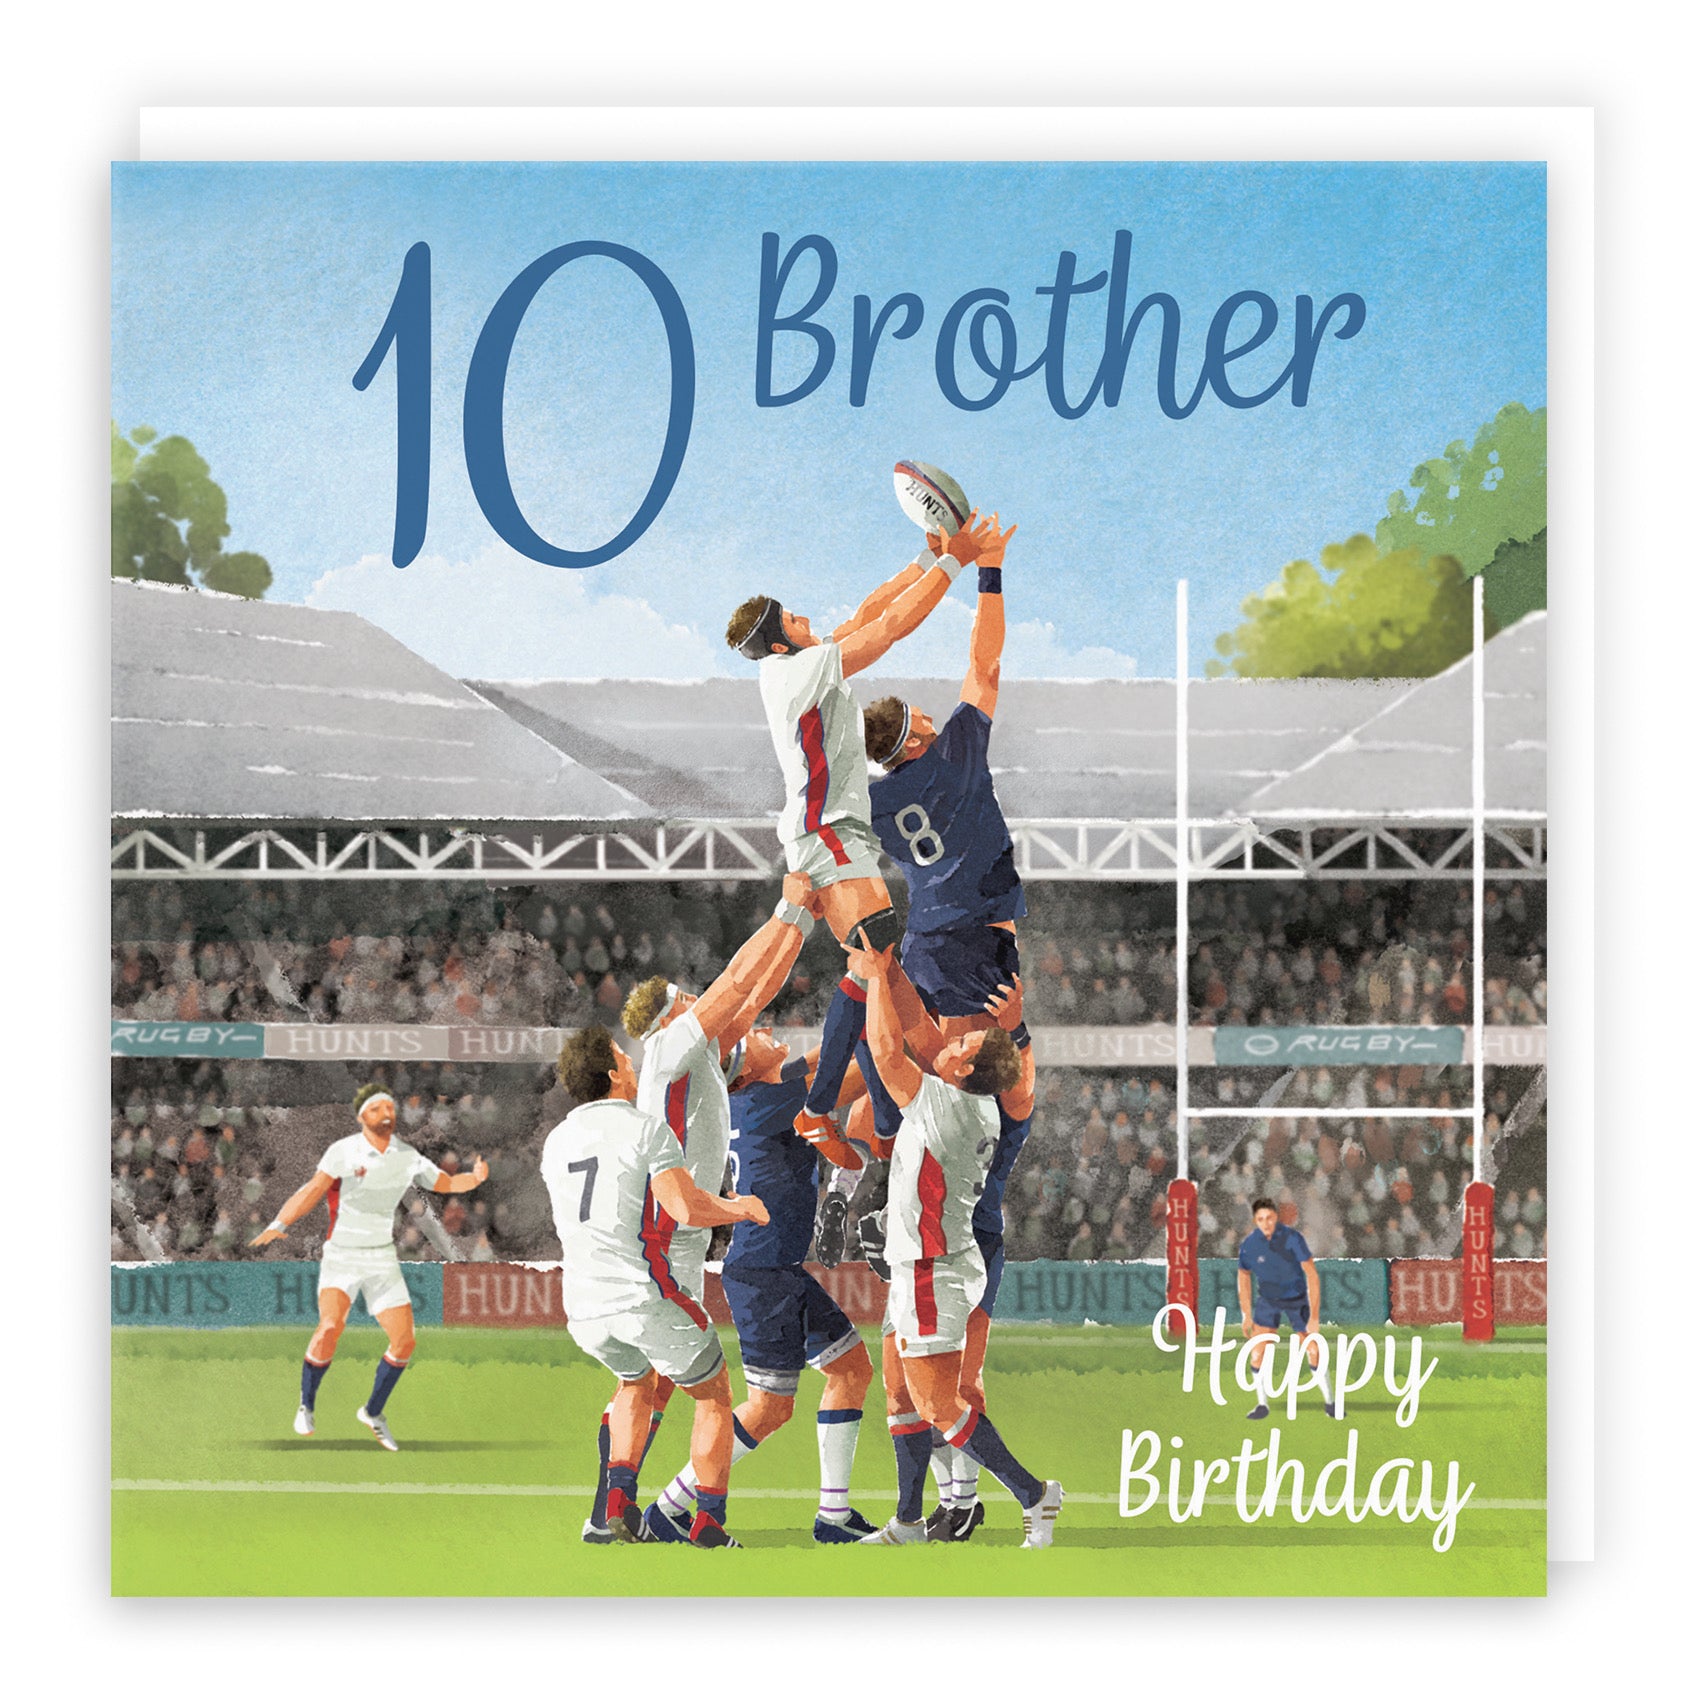 10th Brother Rugby Birthday Card Milo's Gallery - Default Title (B0CPQVH4NM)